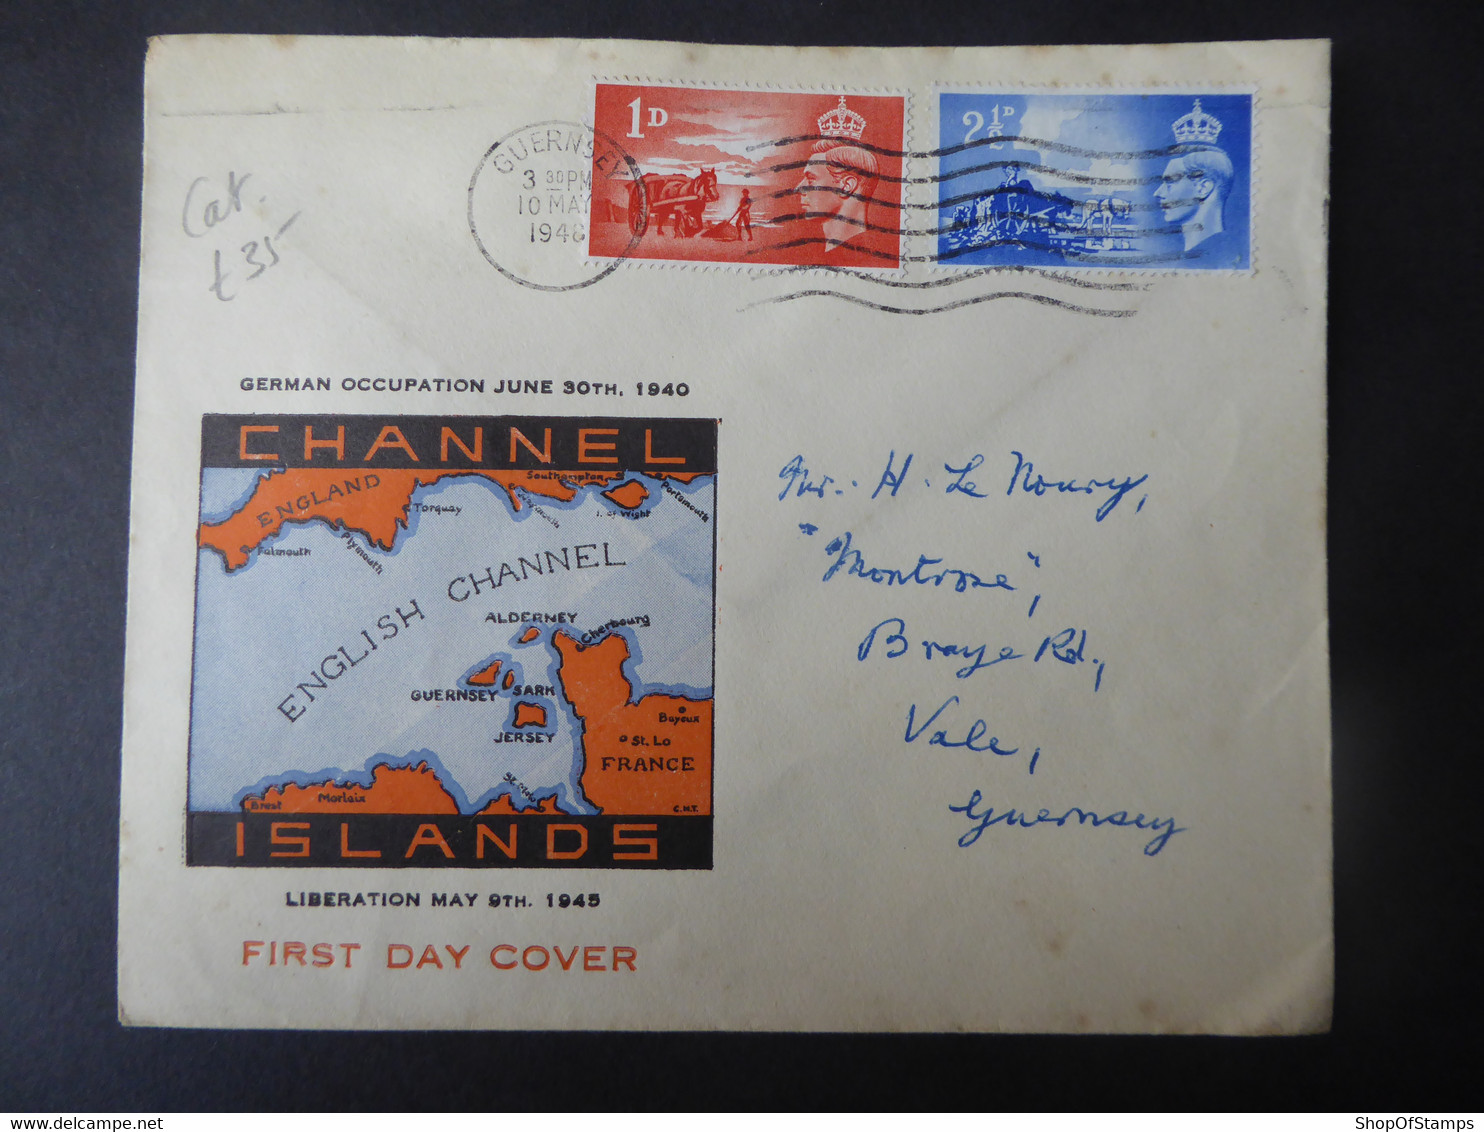 GUERNSEY CHANNEL ISLAND SG C1-C2 FDC 10 MAY 1948  GUERNSEY SPECIAL COVER - Guernsey